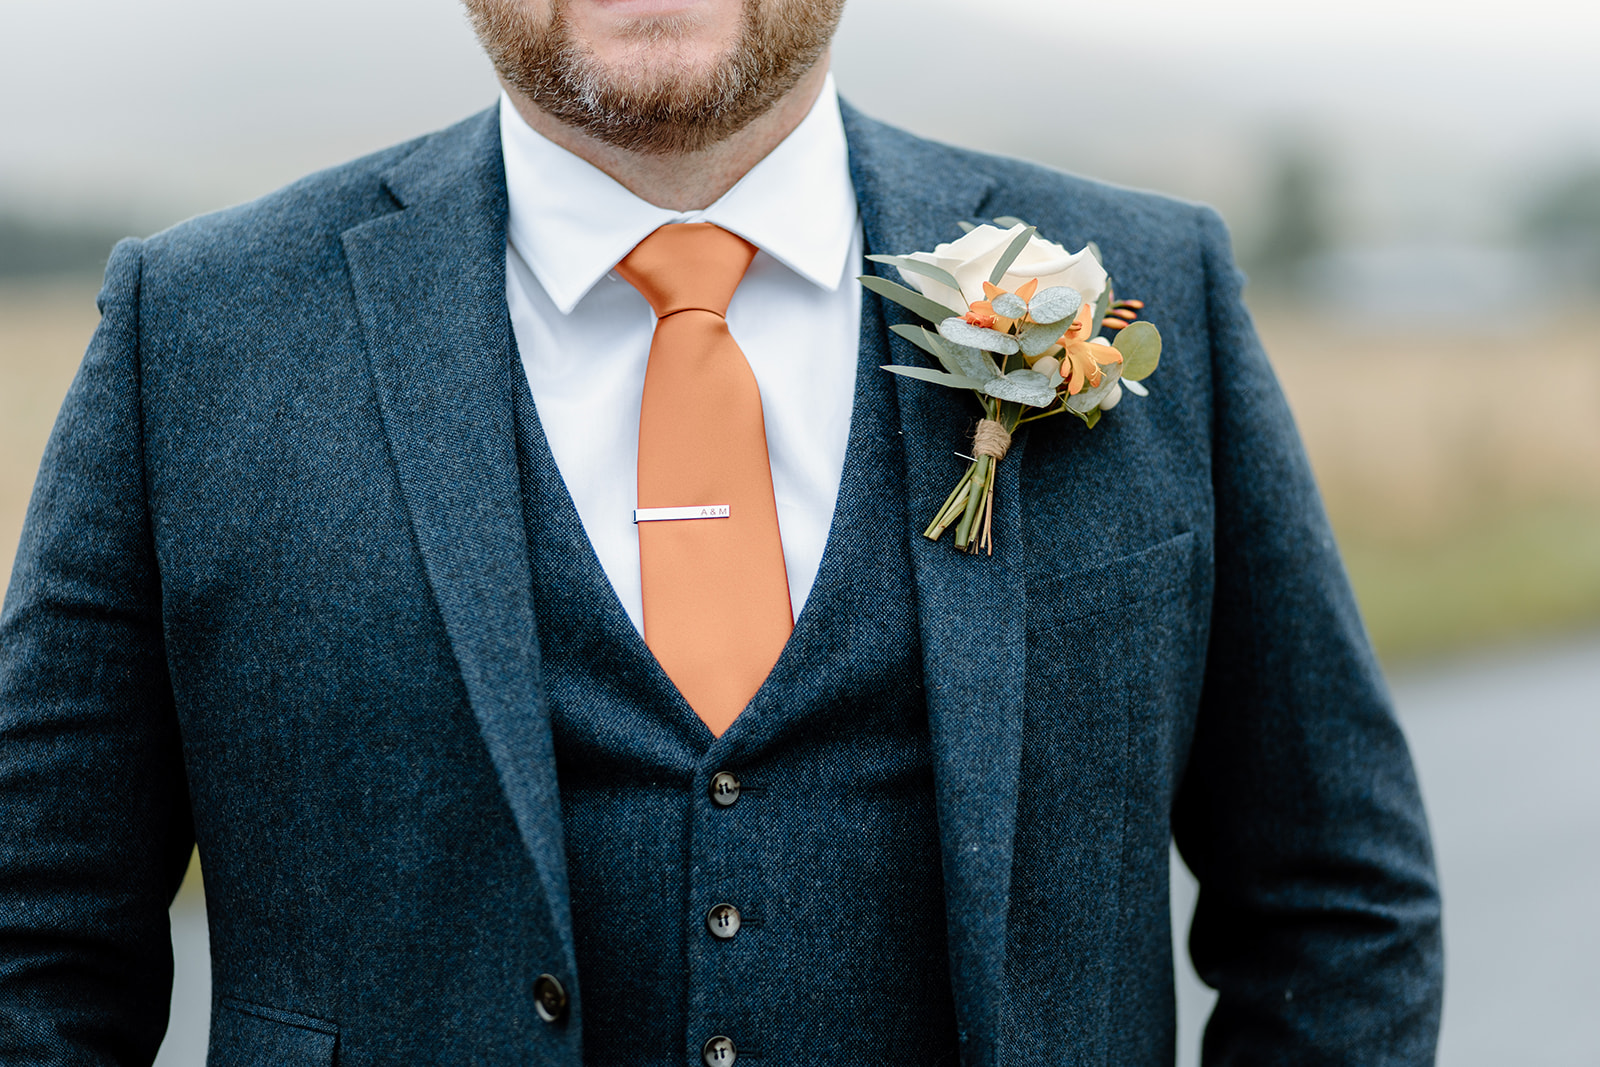 Mike's buttonhole